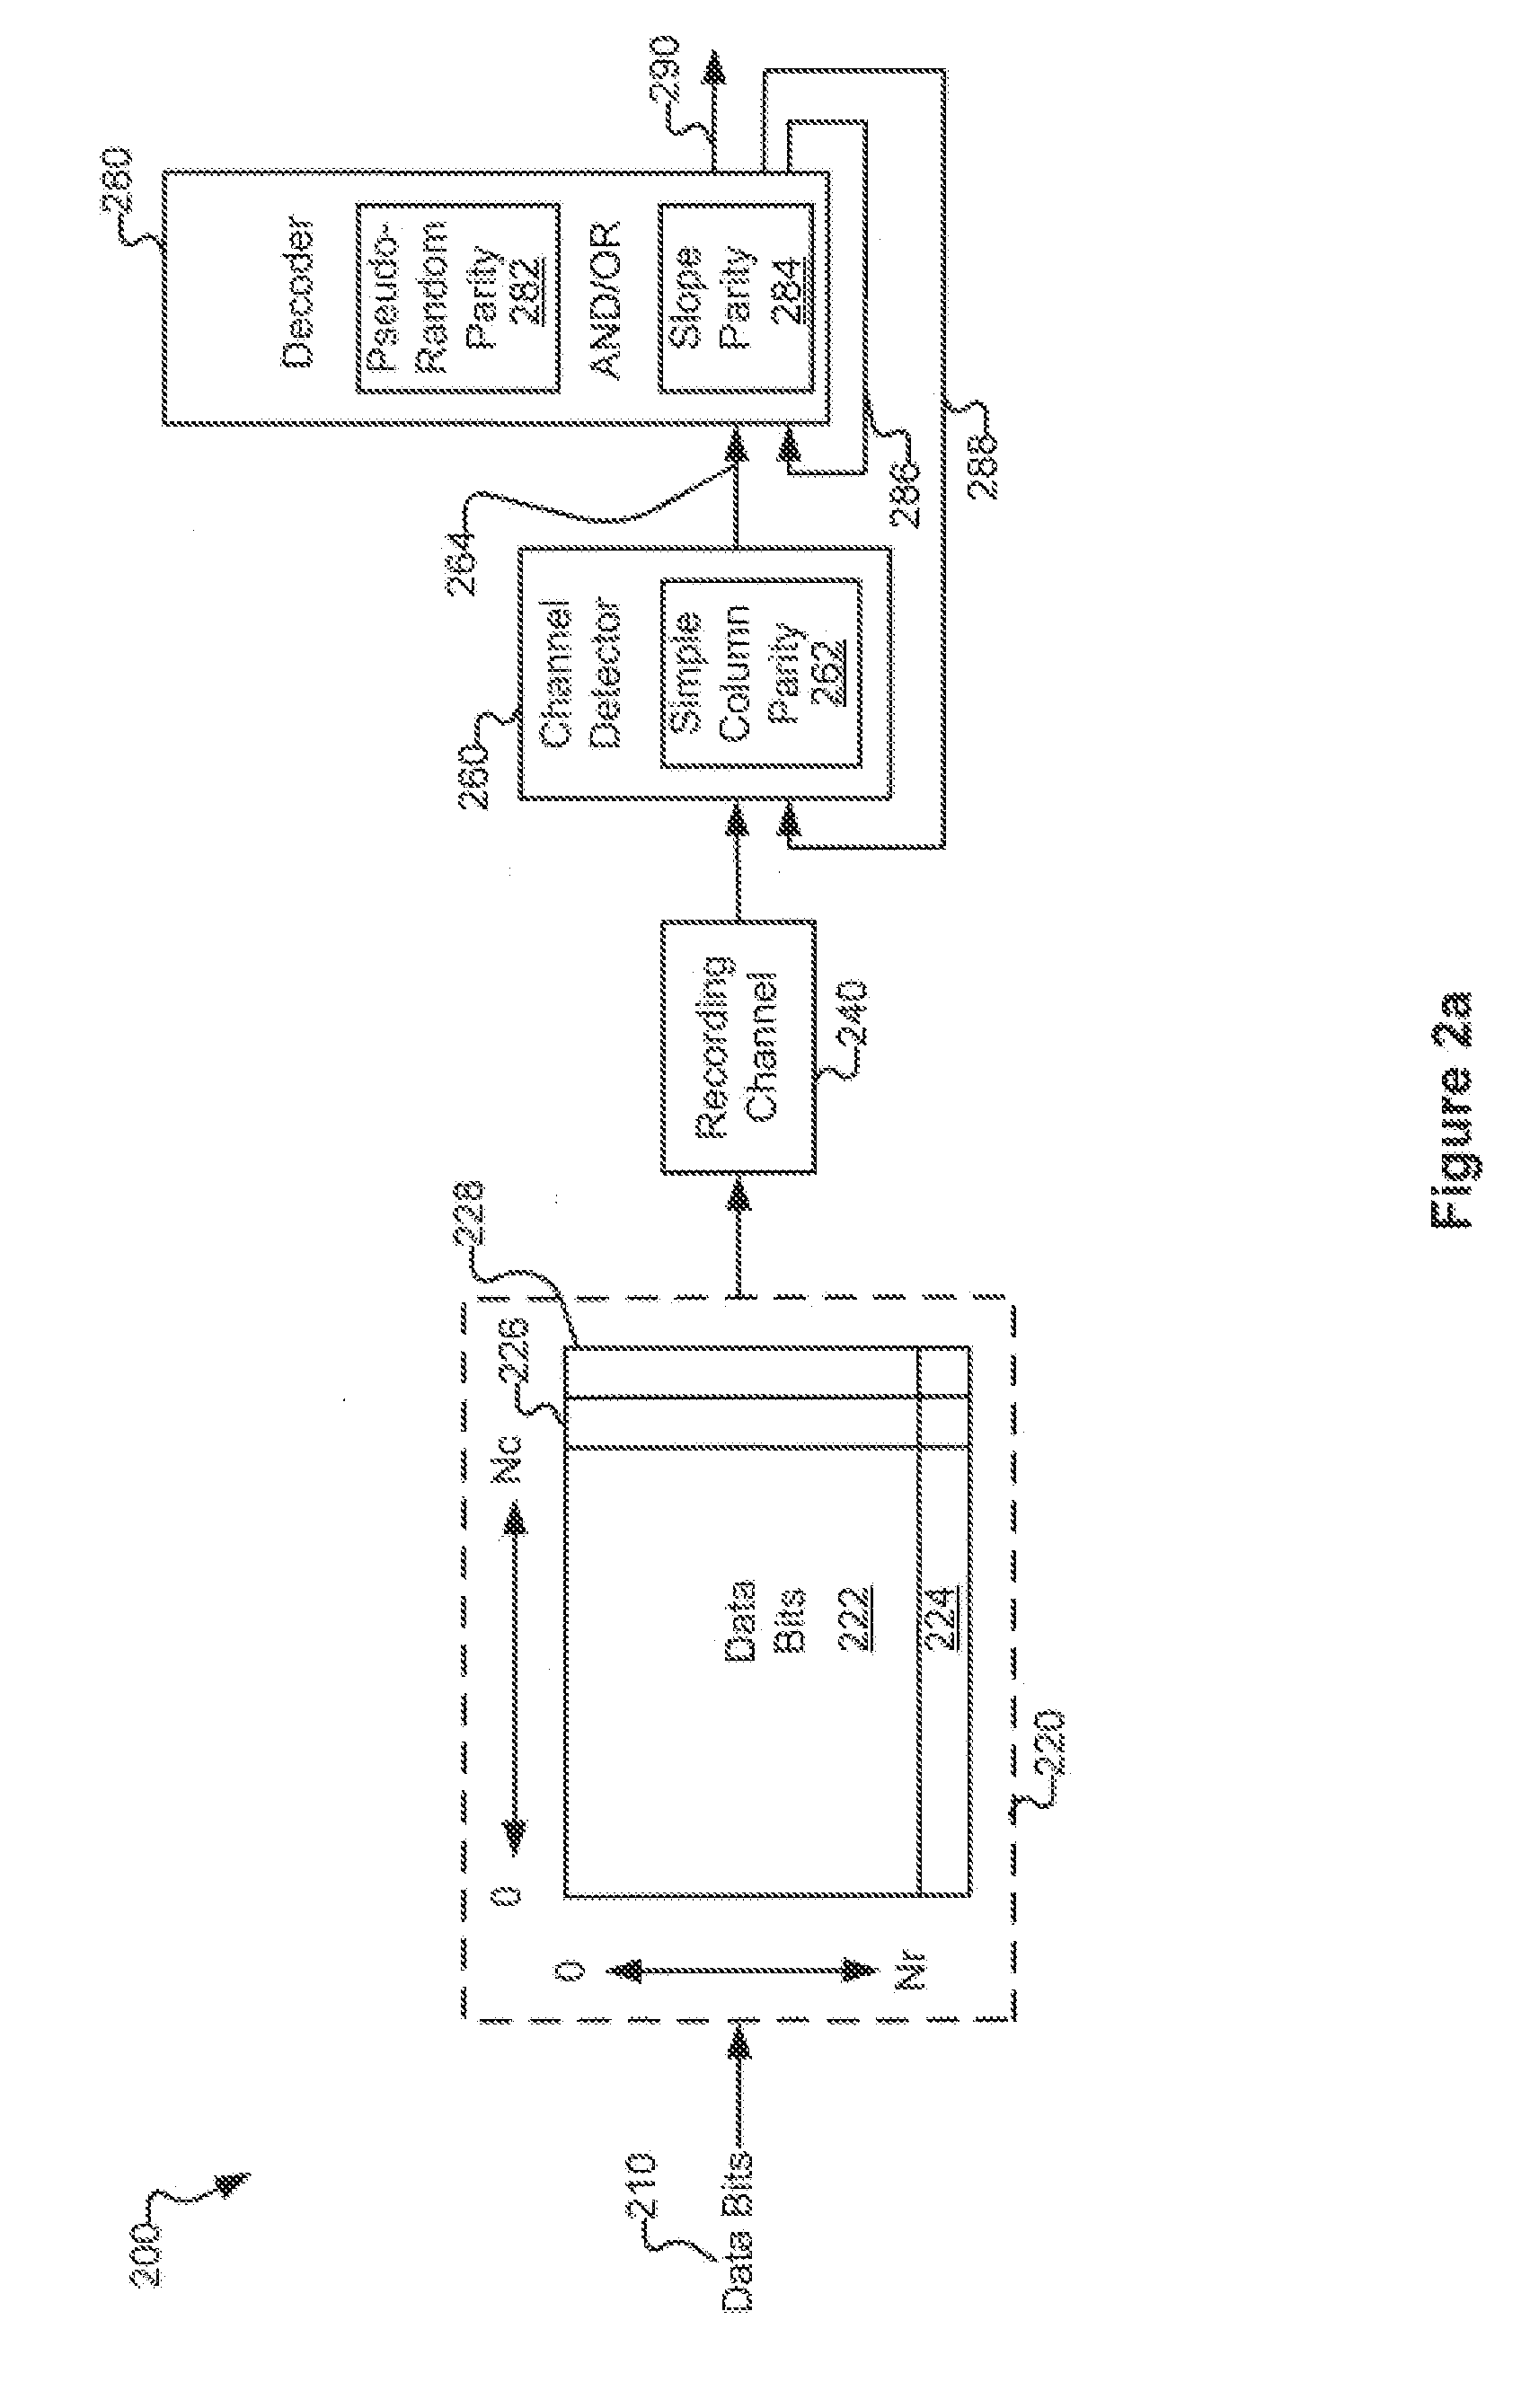 Systems and Methods for Code Based Error Reduction